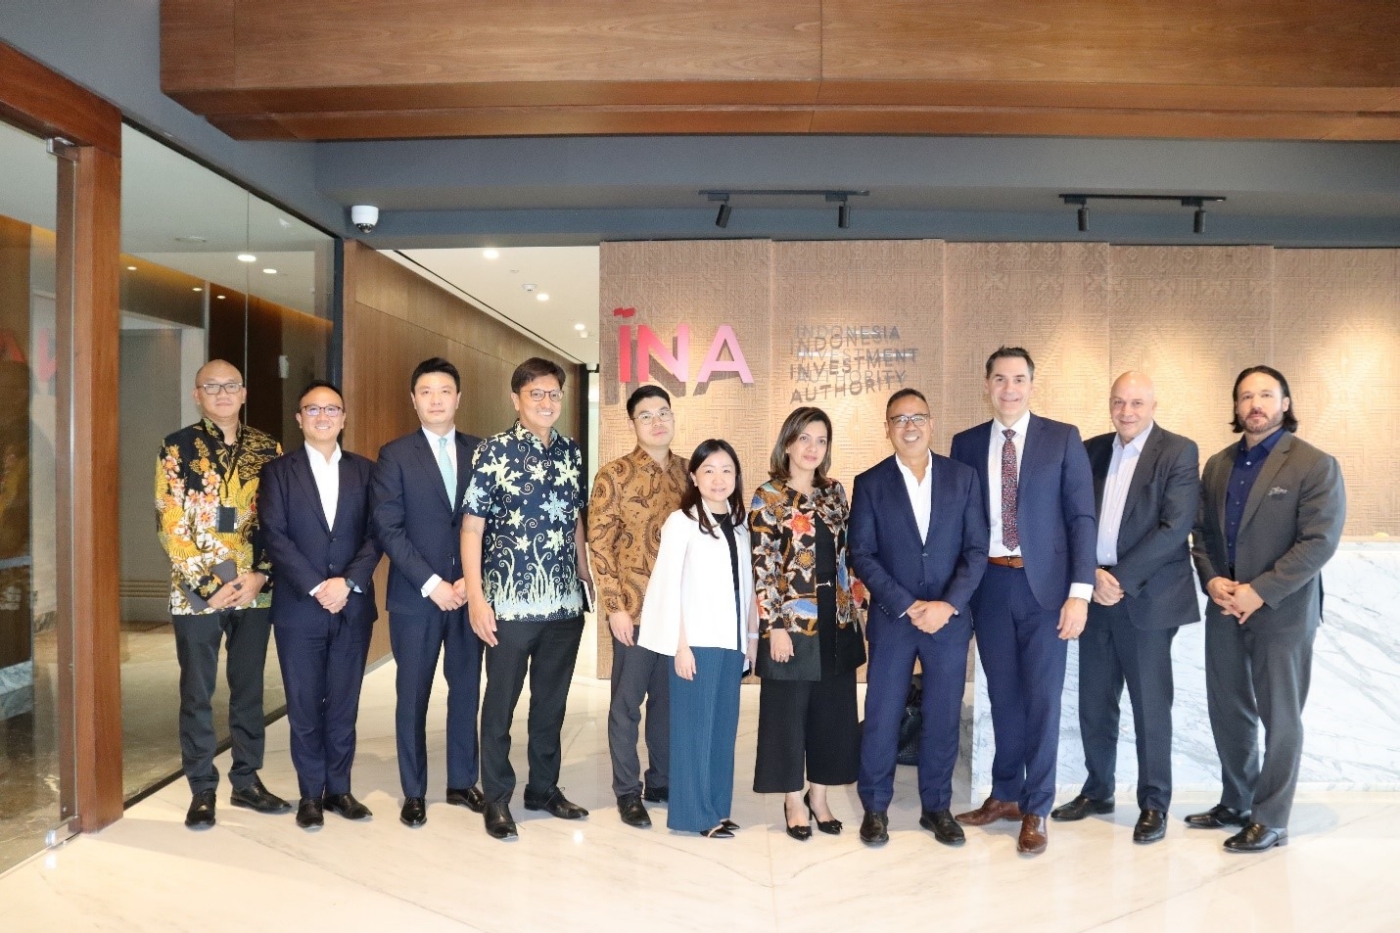 Manulife Investment Management and Indonesia Investment Authority (INA) strategic partnership